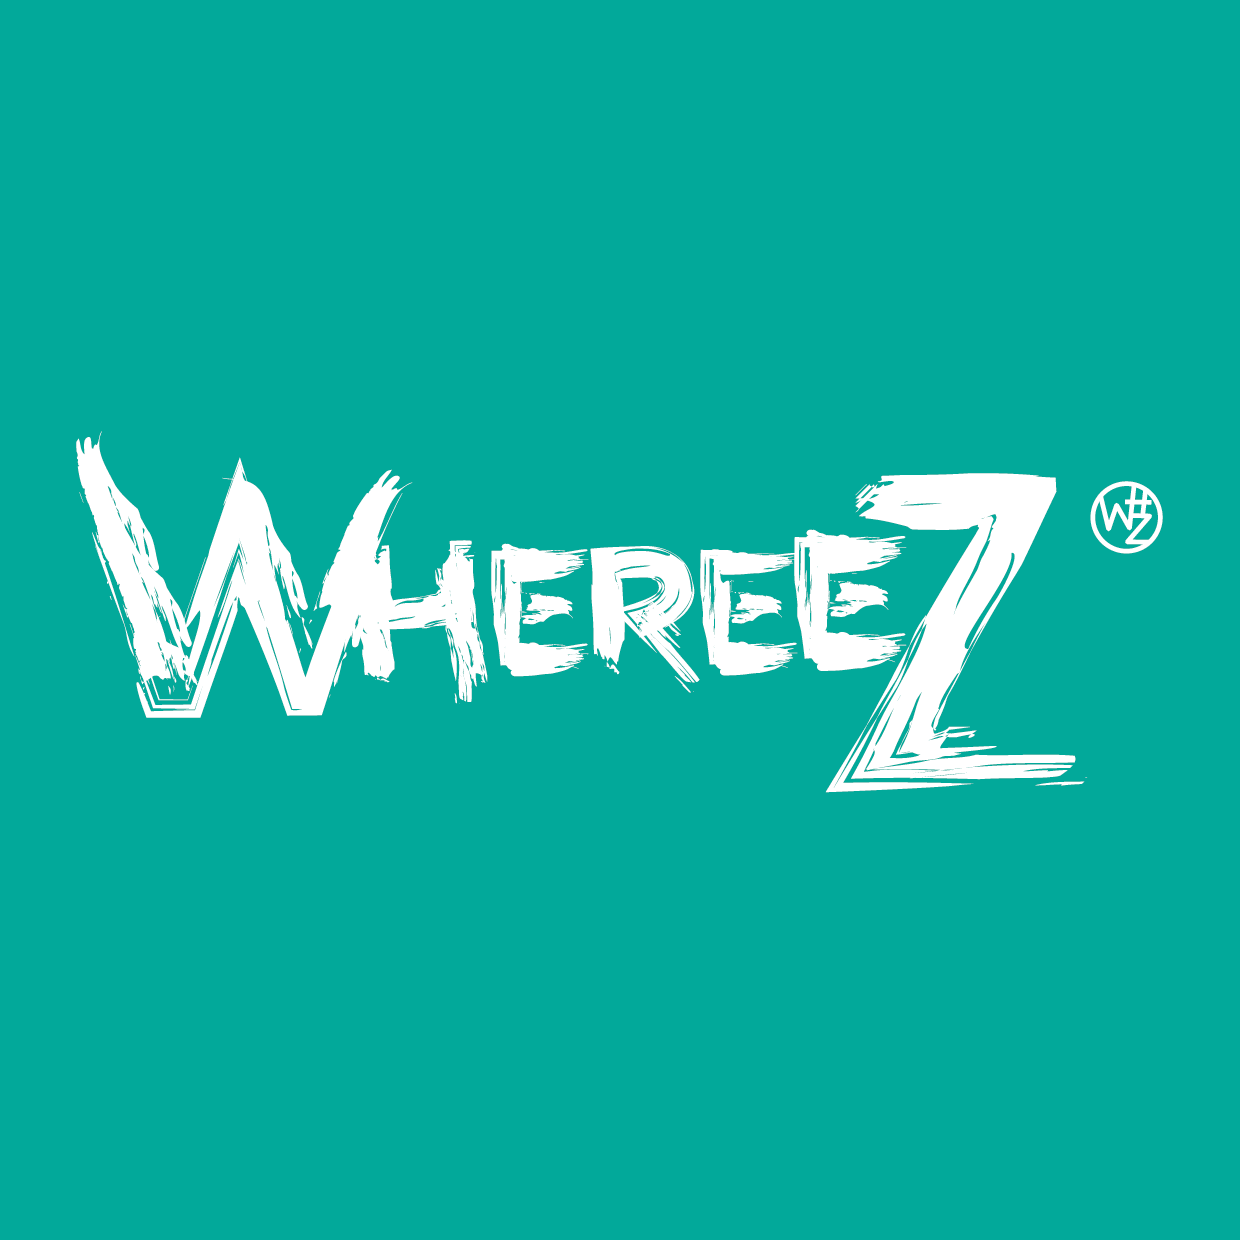 Whereez - Blind test animation in companies (with Buzzers) - Group